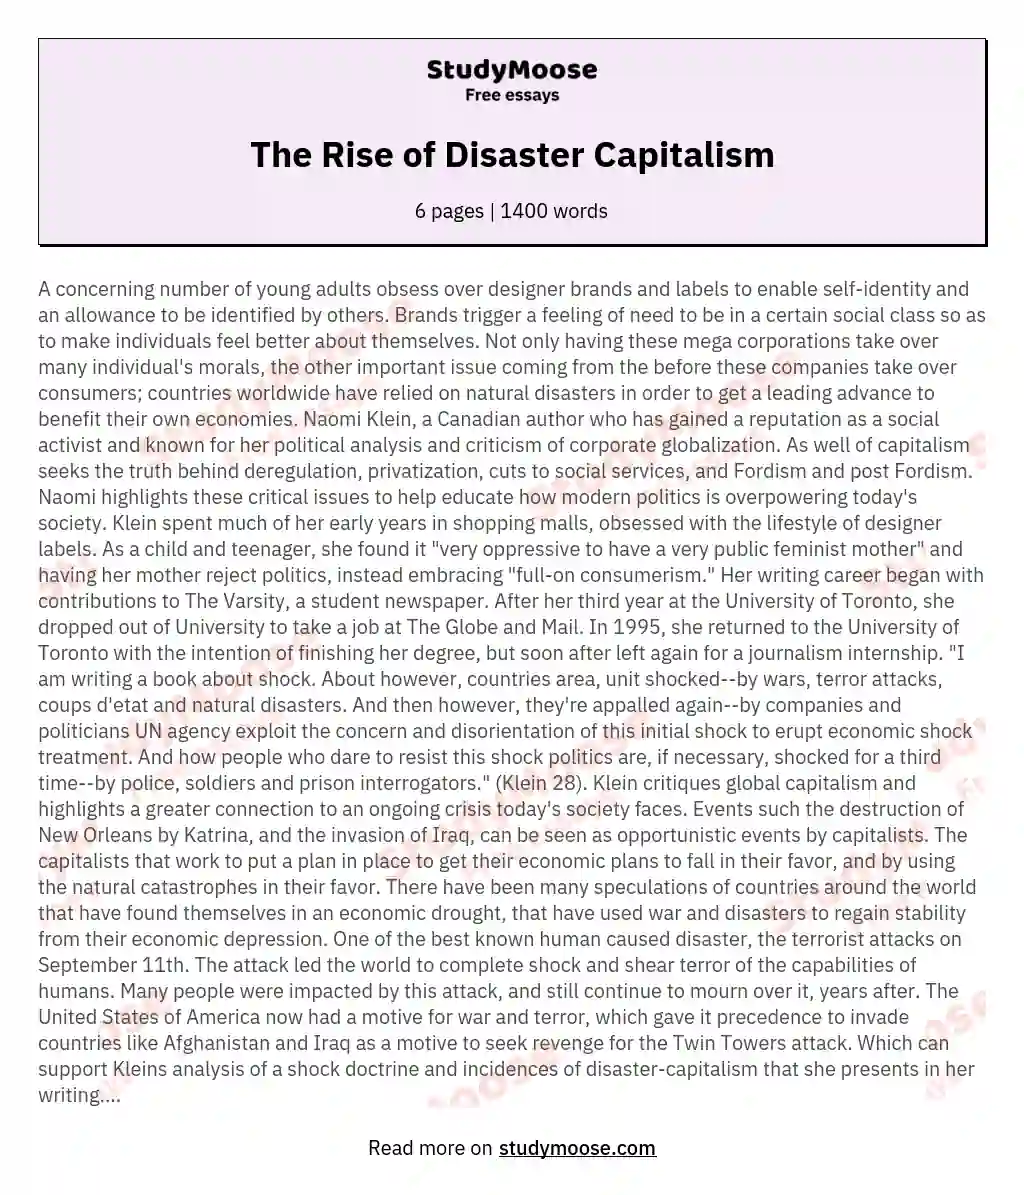 The Rise of Disaster Capitalism essay